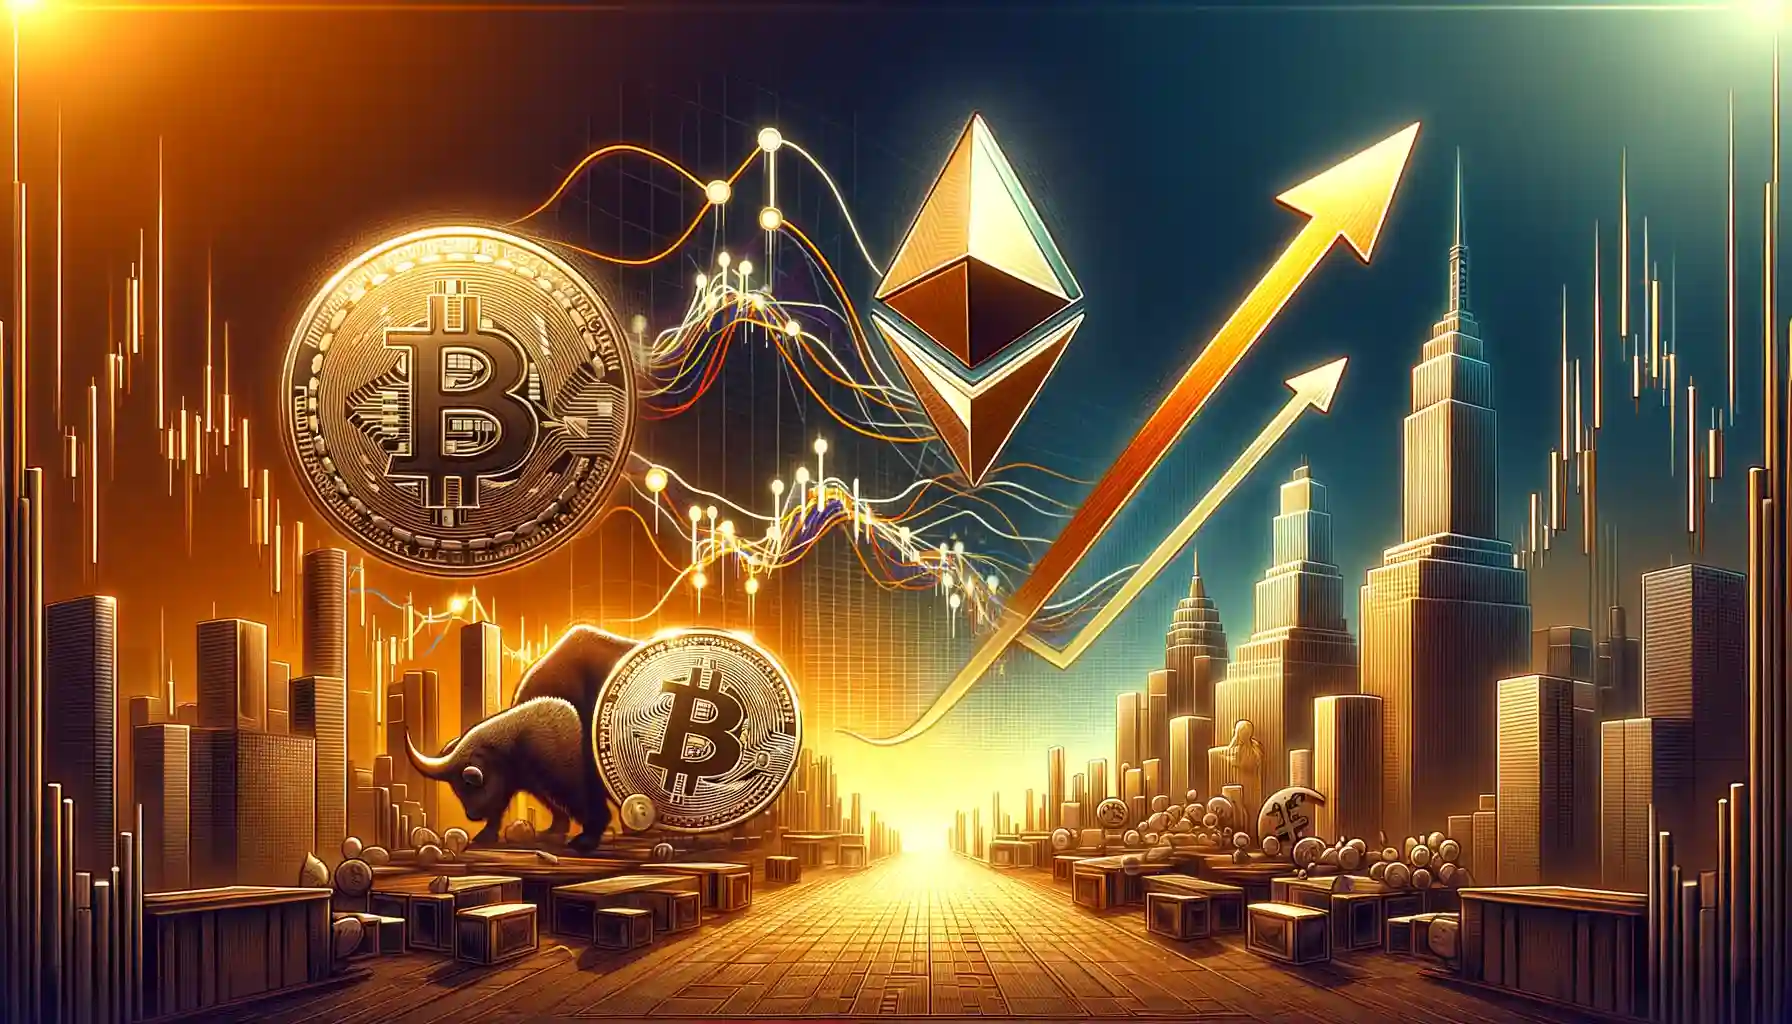 Here's what's going on with Bitcoin, Ethereum, and the S&P 500